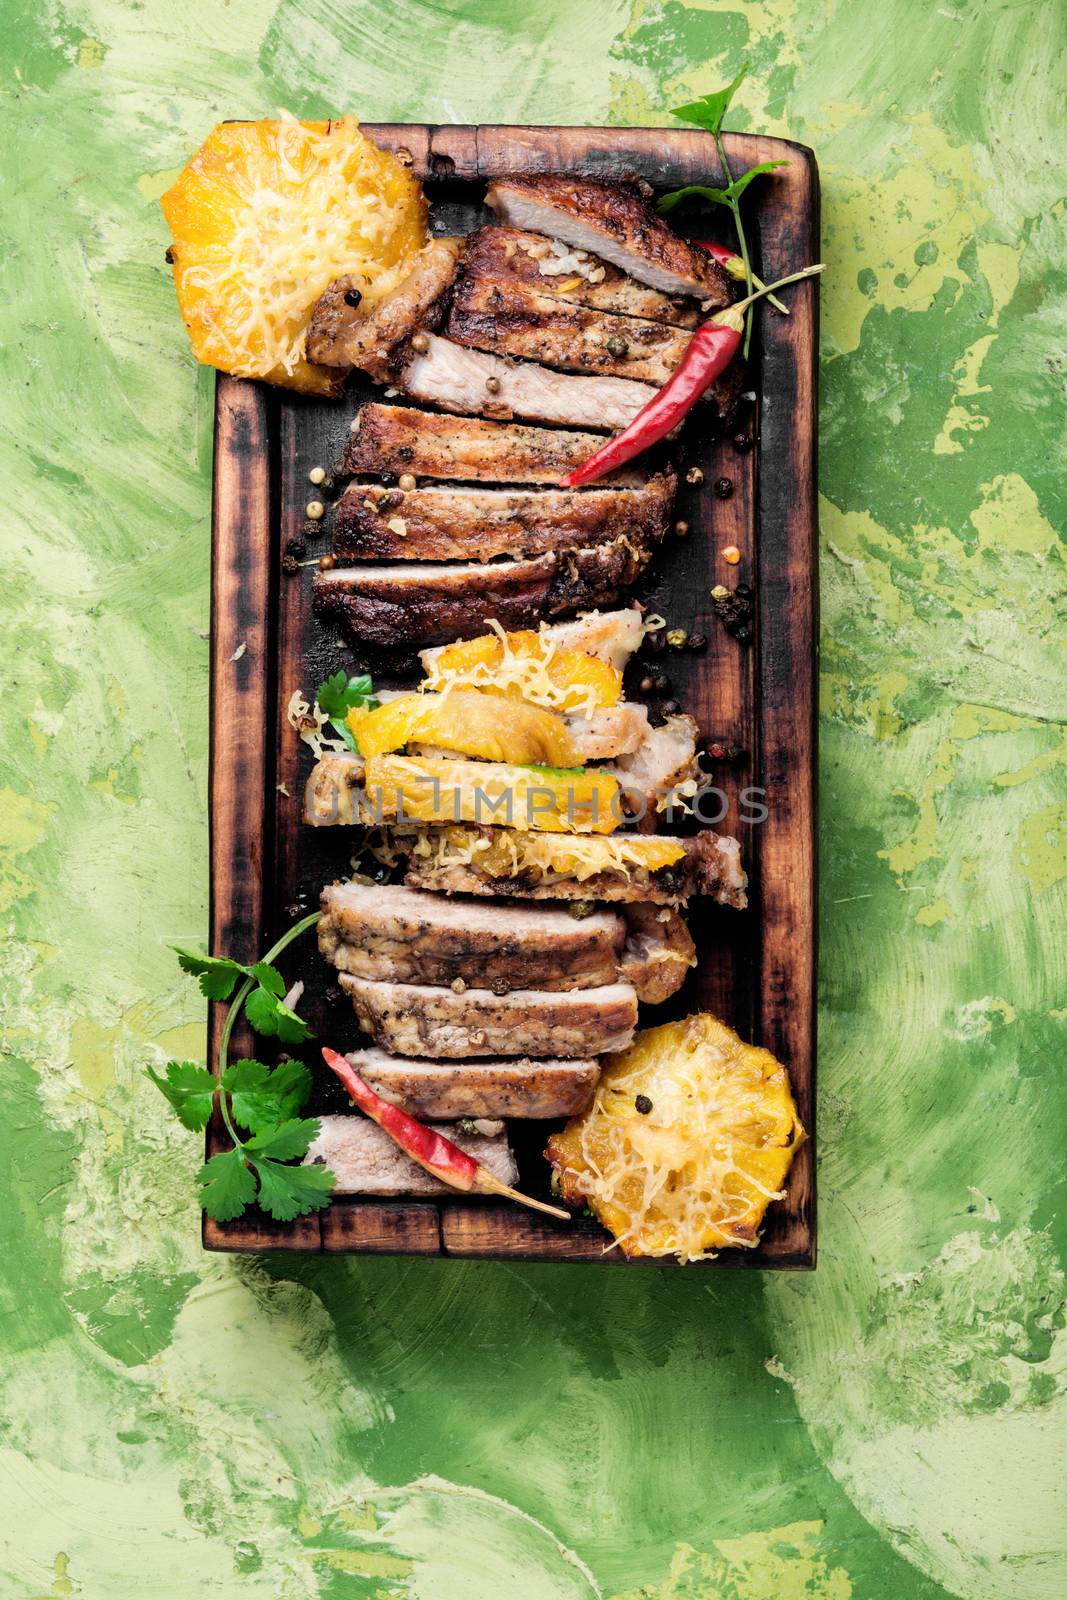 Grilled beef steak with pineapple on cutting board